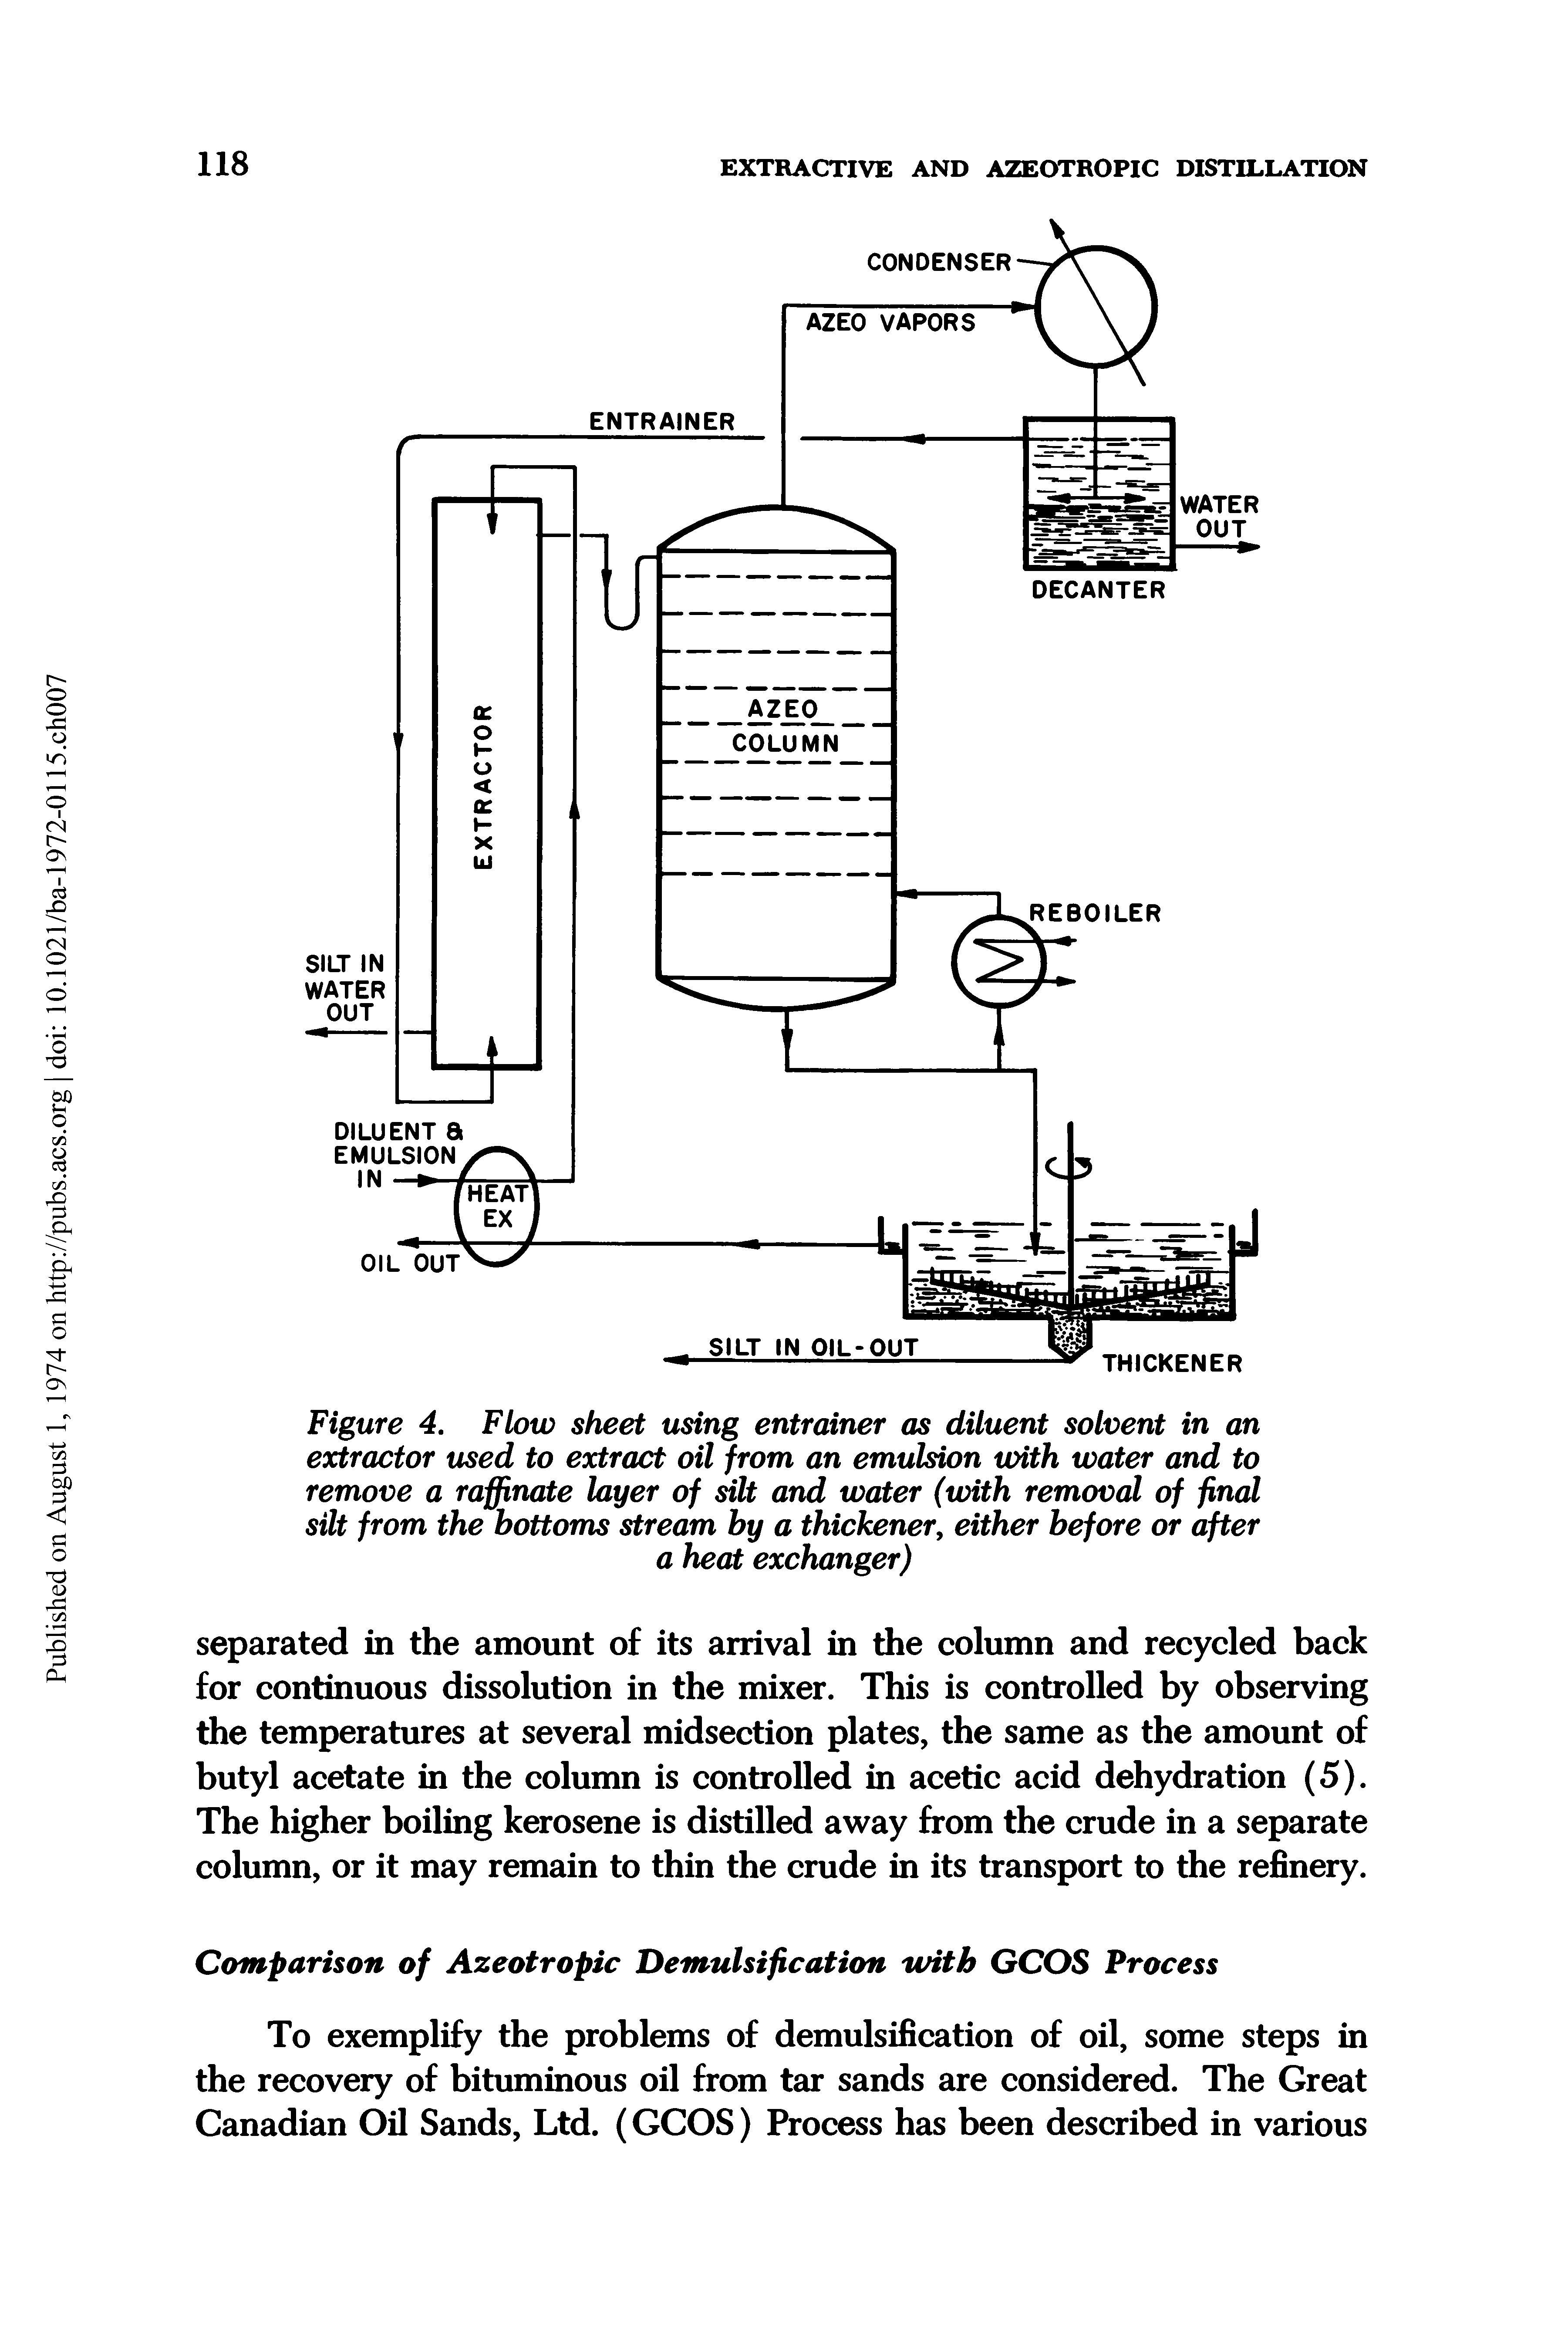 Figure 4. Flow sheet using entrainer as diluent solvent in an extractor used to extract oil from an emulsion with water and to remove a raffinate layer of silt and water (with removal of final silt from the bottoms stream by a thickener, either before or after a heat exchanger)...